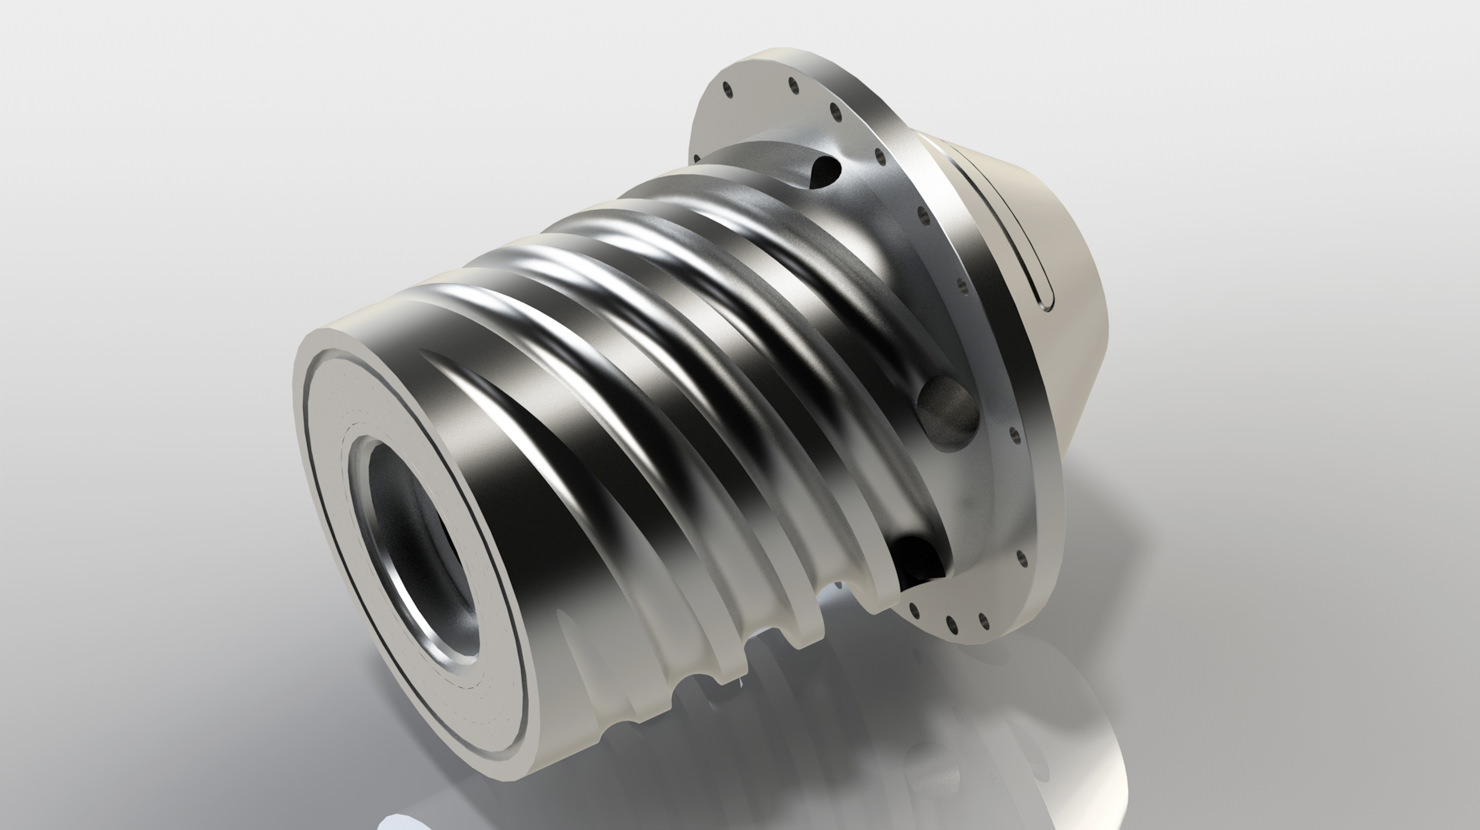 Customer-specific extrusion heads